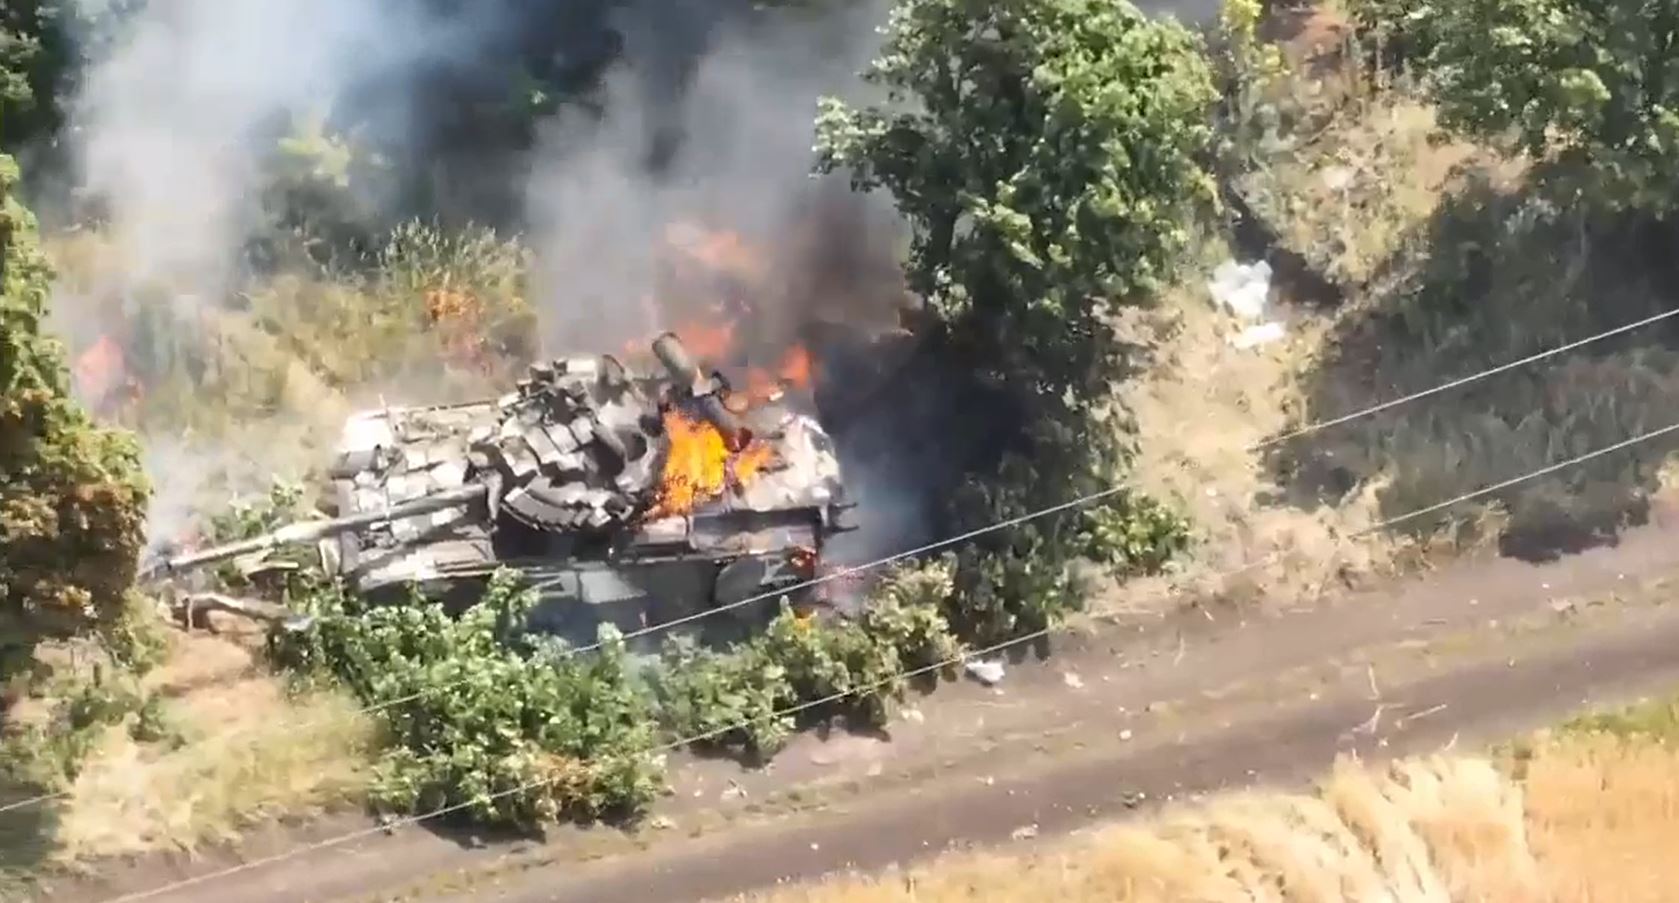 Photo: Russian T-80BV tank on fire. Credit: OTU "Pivnich", Military unit of the Armed Forces of Ukraine via Facebook. https://www.facebook.com/watch/?v=463092205554584